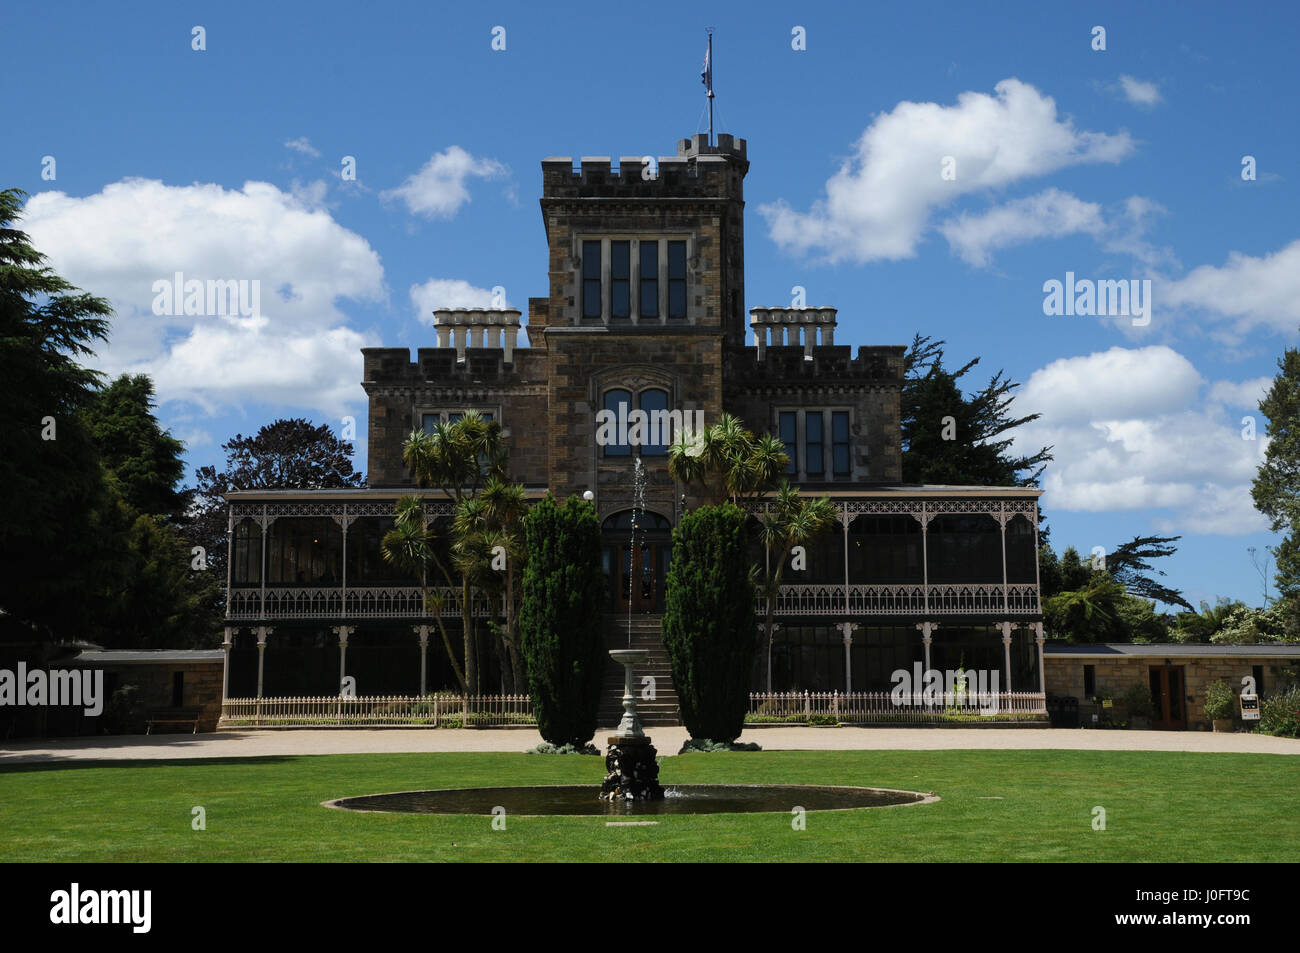 Larnach Castle, nr. Dunedin on New Zealand's South Island claims to be the country's only castle. It was built 1871 for William Larnach. Stock Photo